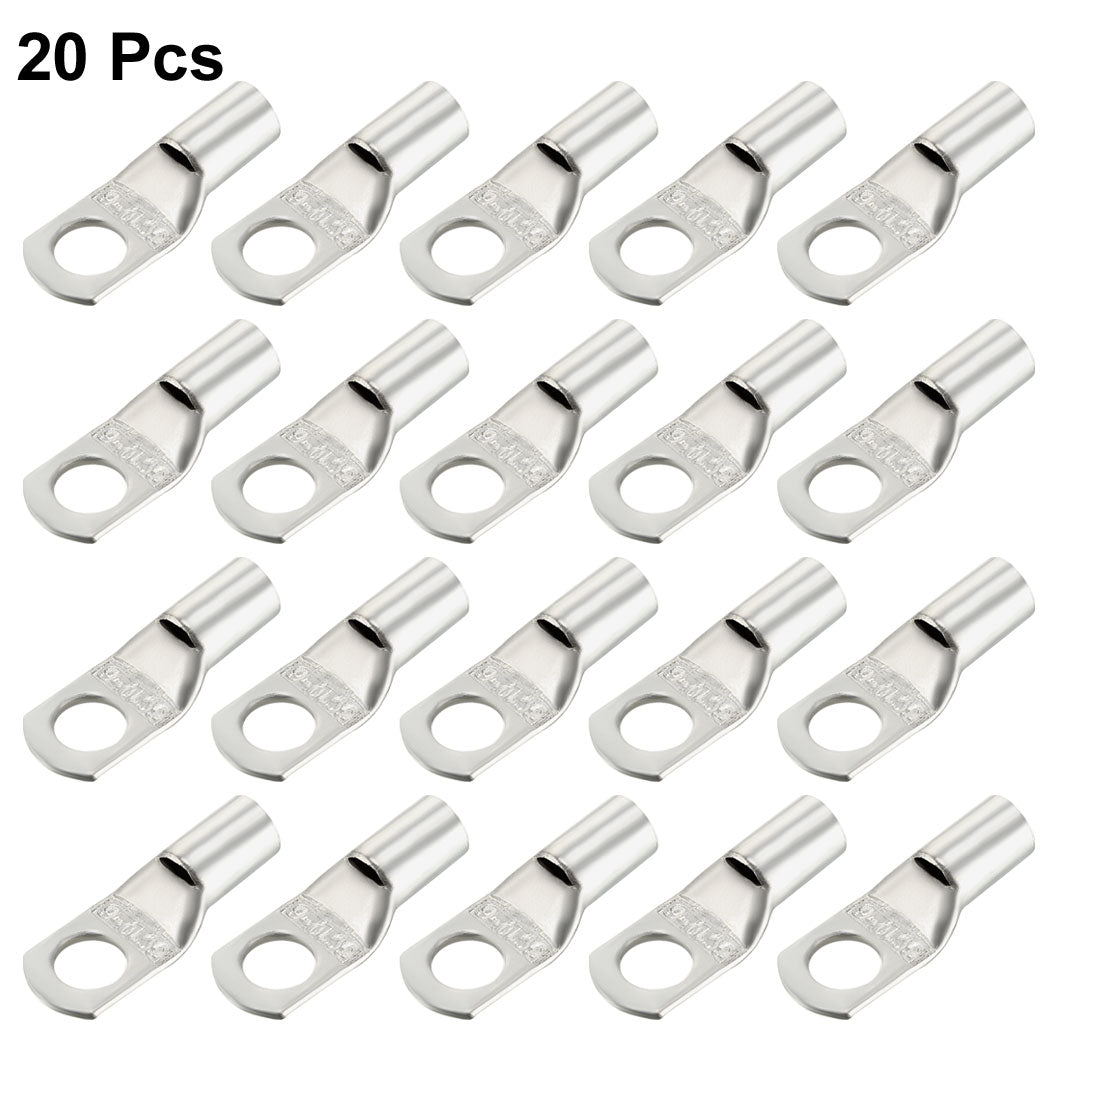 uxcell Uxcell 20Pcs SC10-6 Non-Insulated U-Type Copper Crimp Terminals 6mm2 Wire Connector Silver Tone